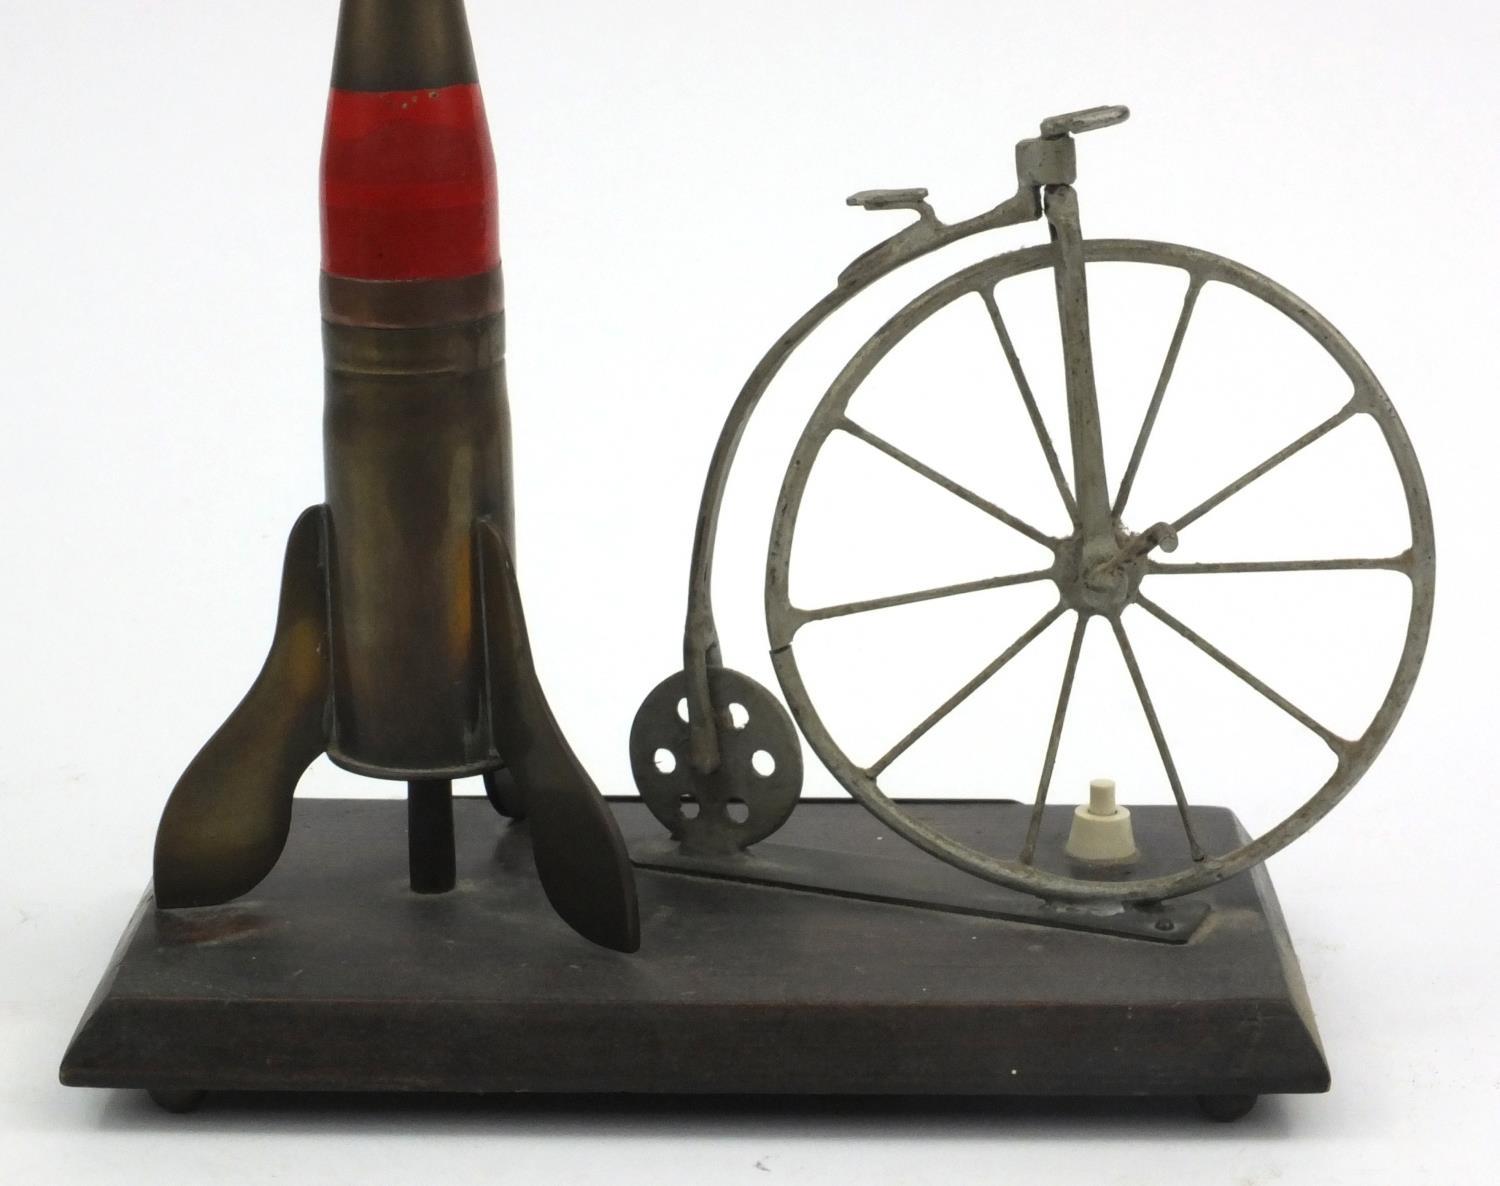 Military interest trench art table light titled 'Travel Through The Ages', raised on an oak base, - Image 8 of 11